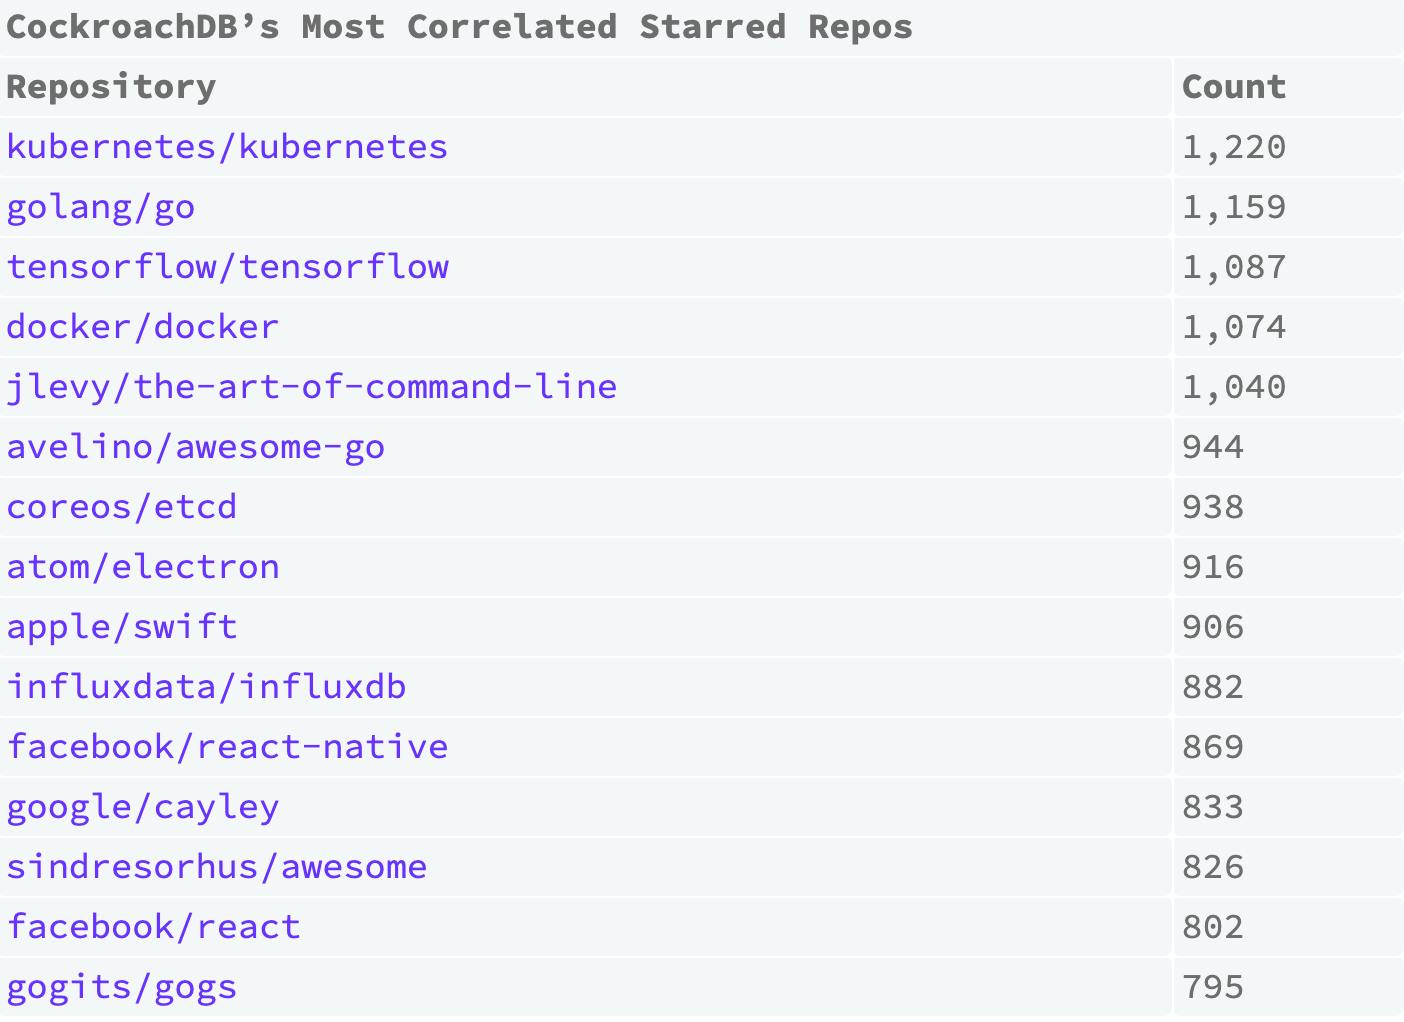 Top 15 Most Correlated Starred Repos